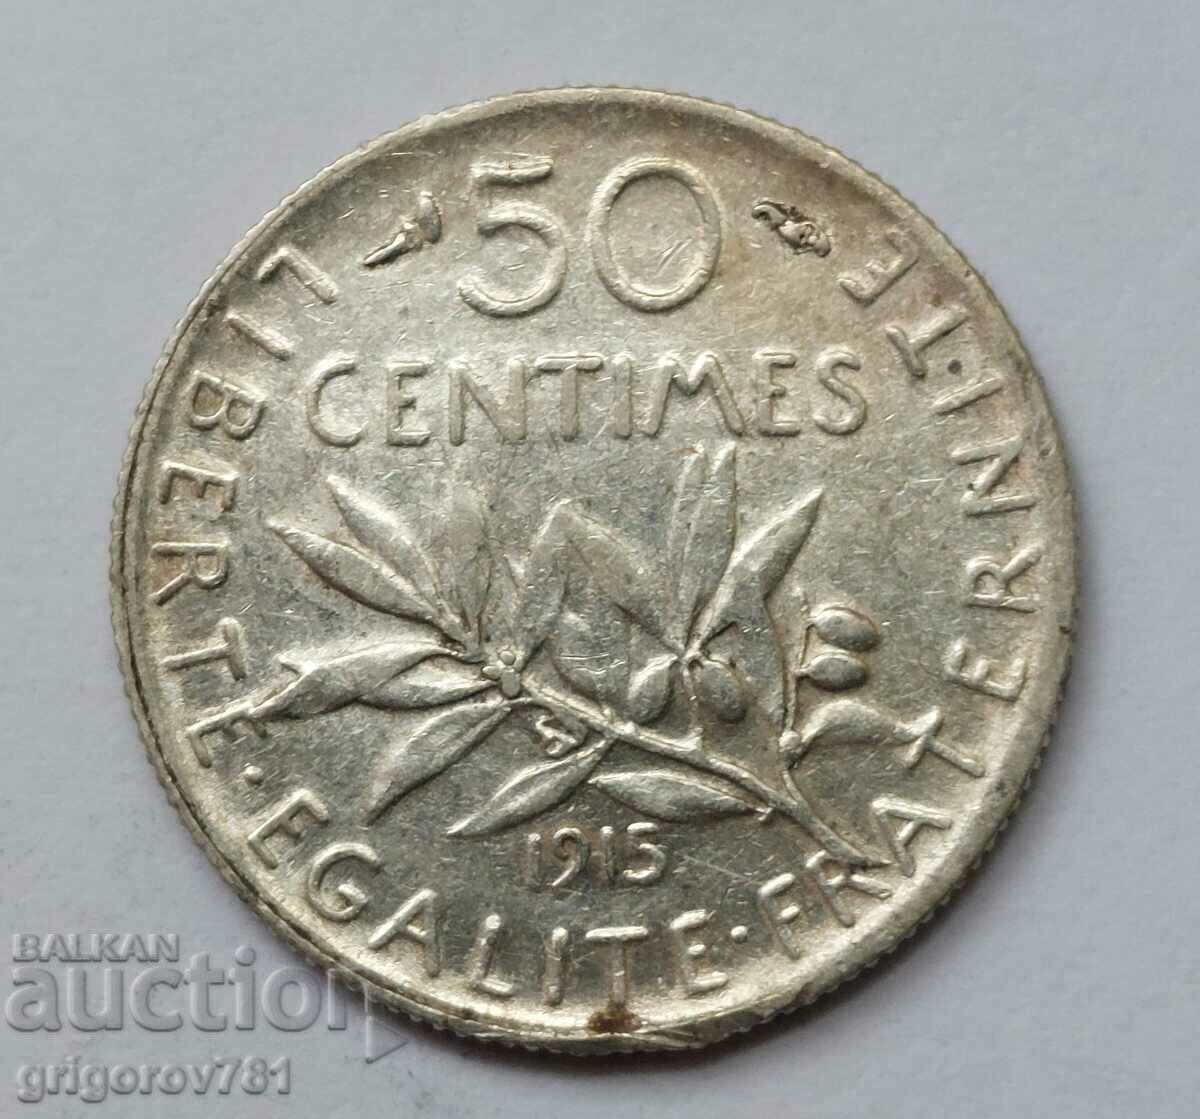 50 centimes silver France 1915 - silver coin #69